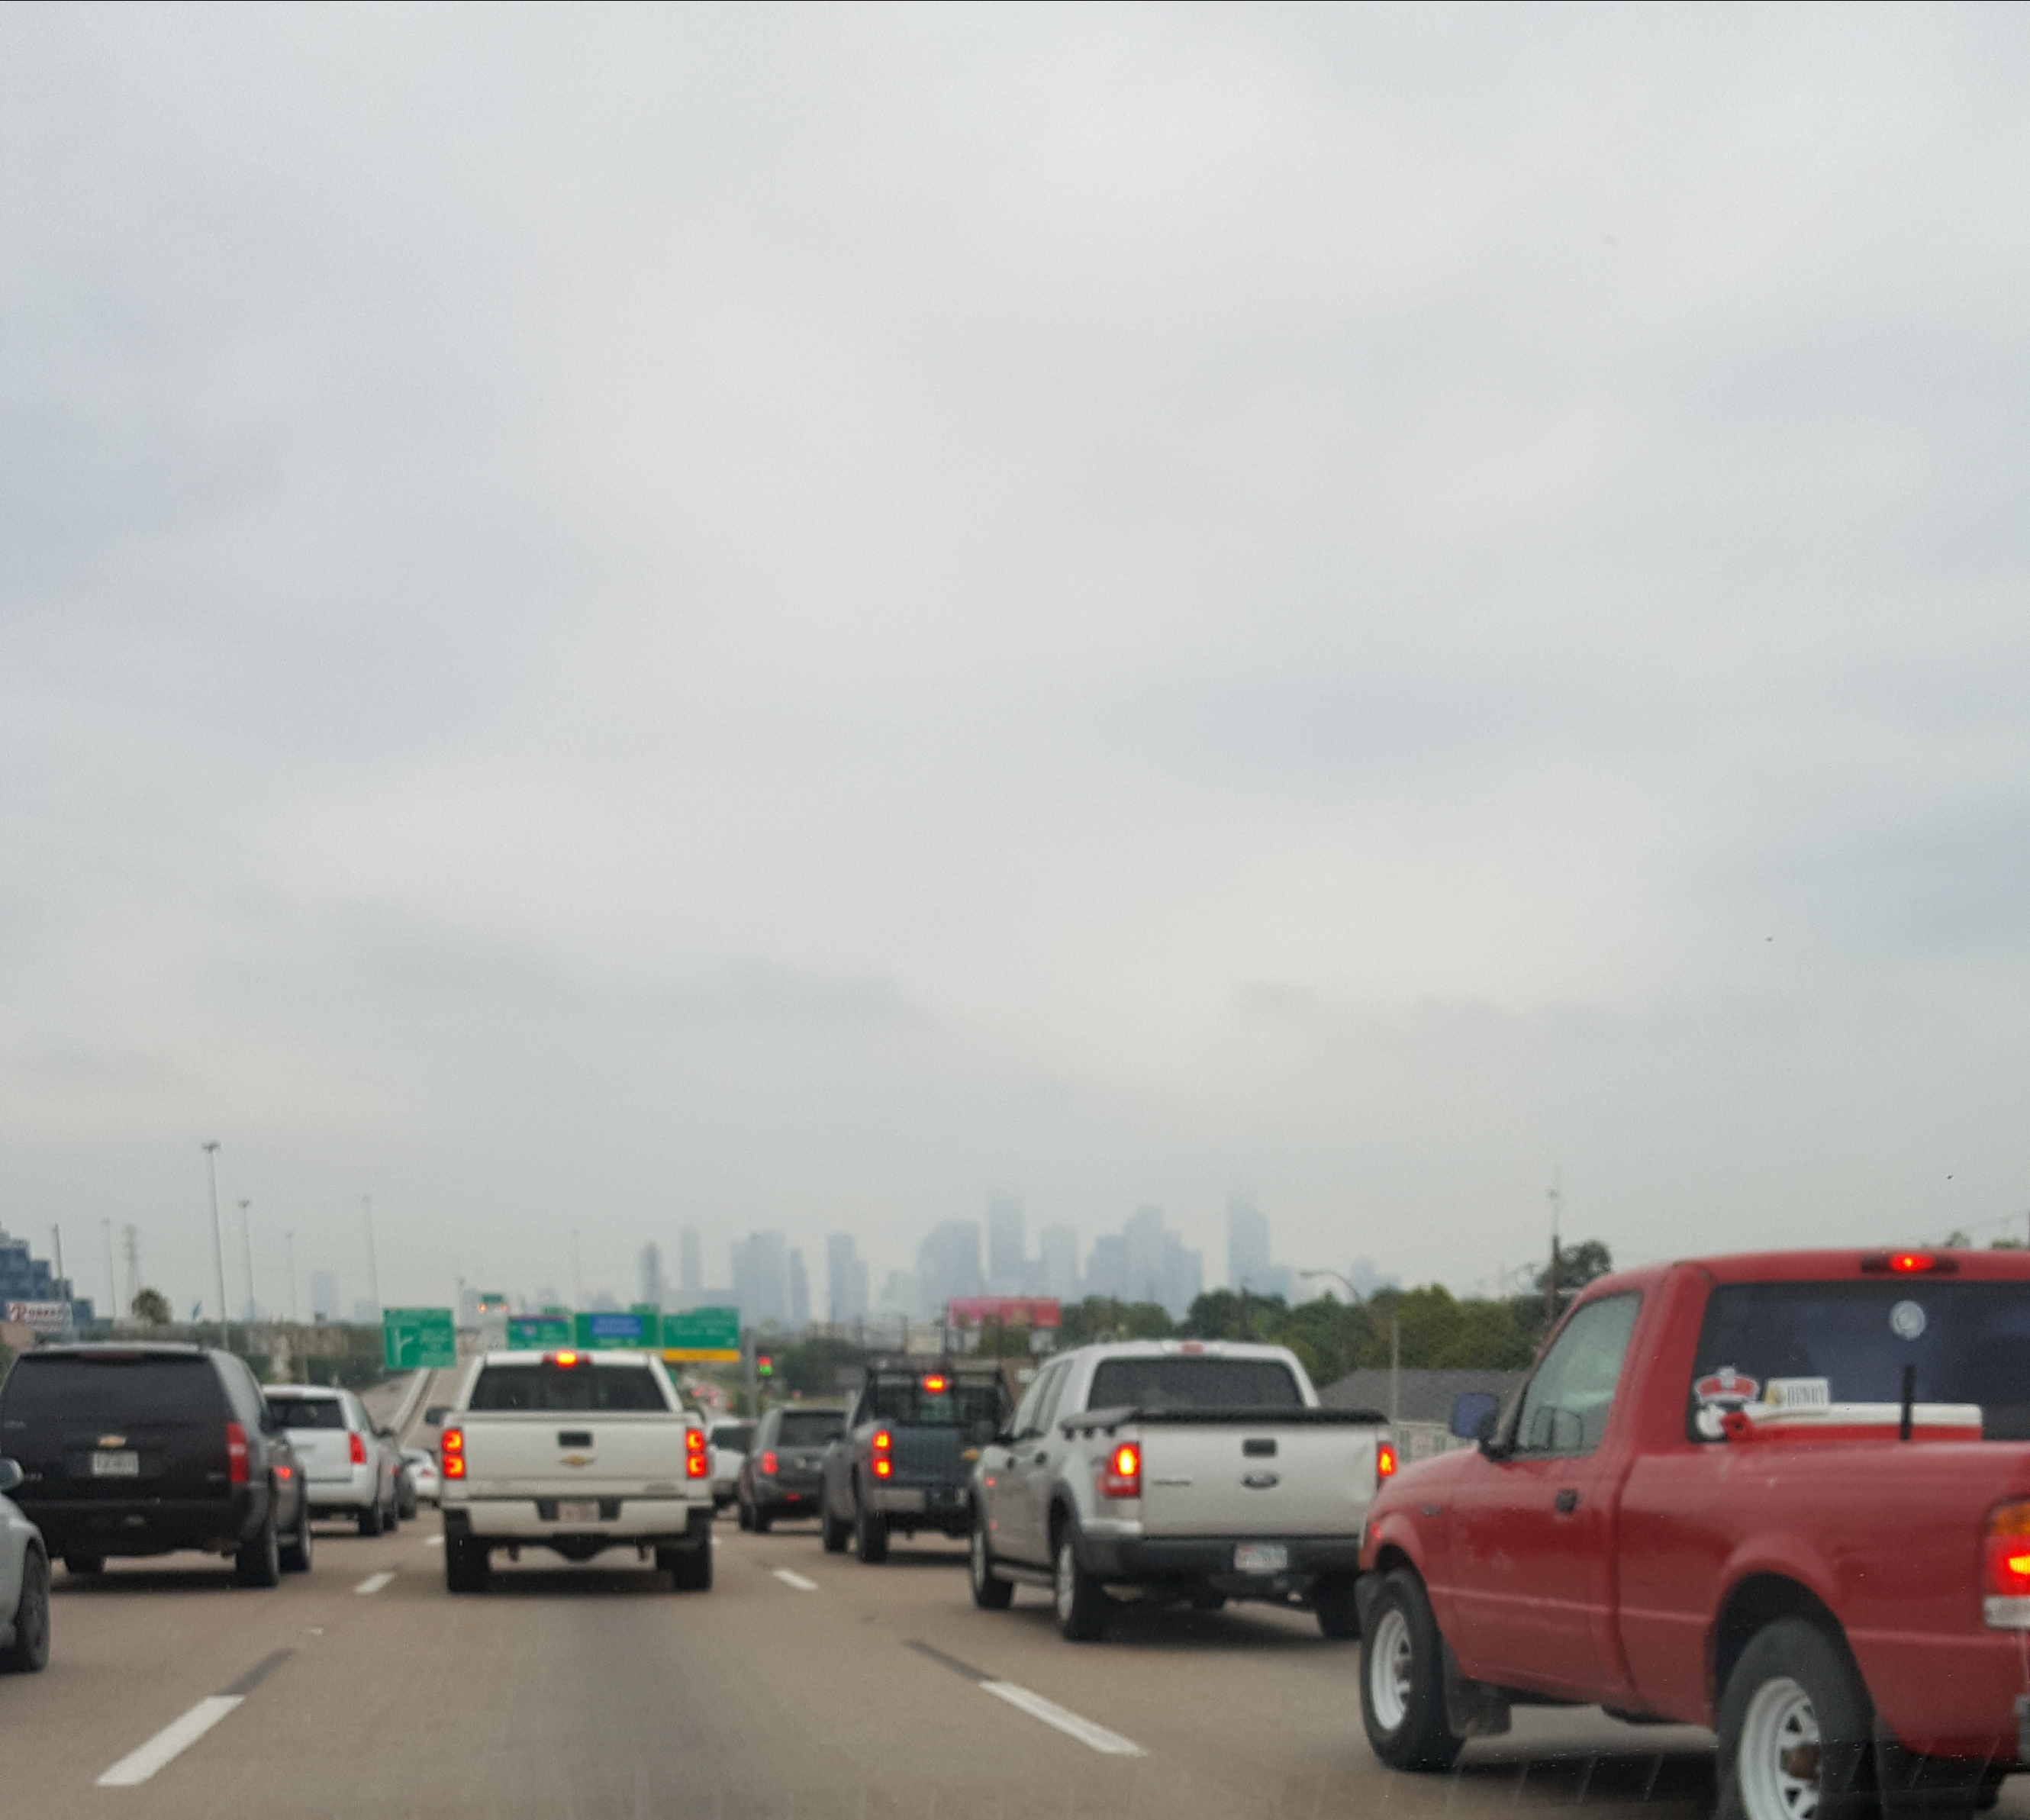 The hazy Houston skyline this morning about 8:30 a.m. CDT. Yes, we were stopped.